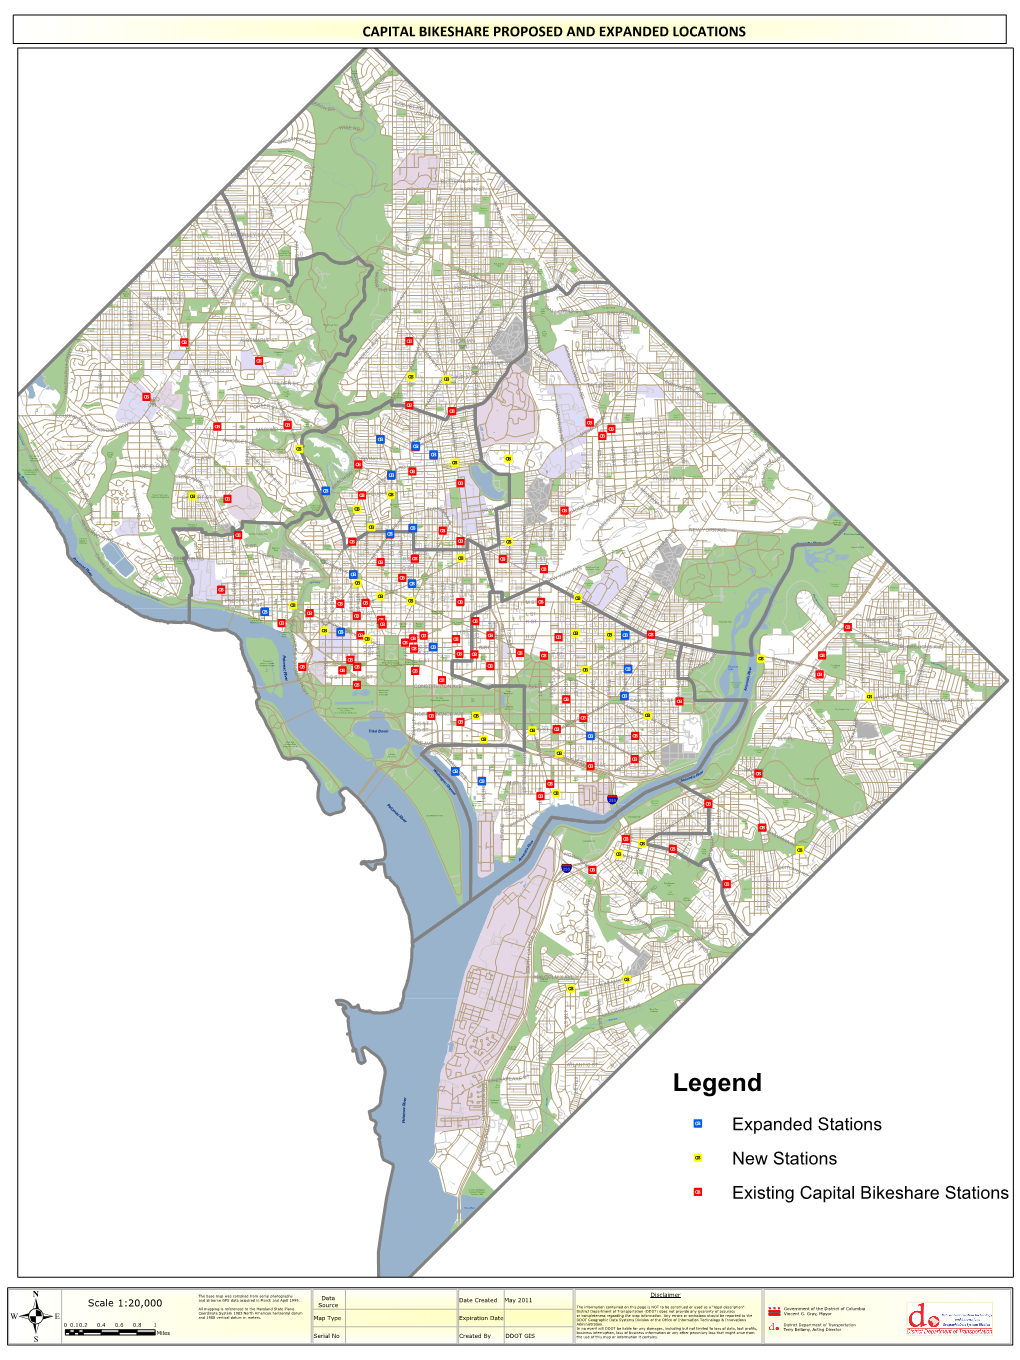 Capital Bikeshare Proposed and Expanded Loactions